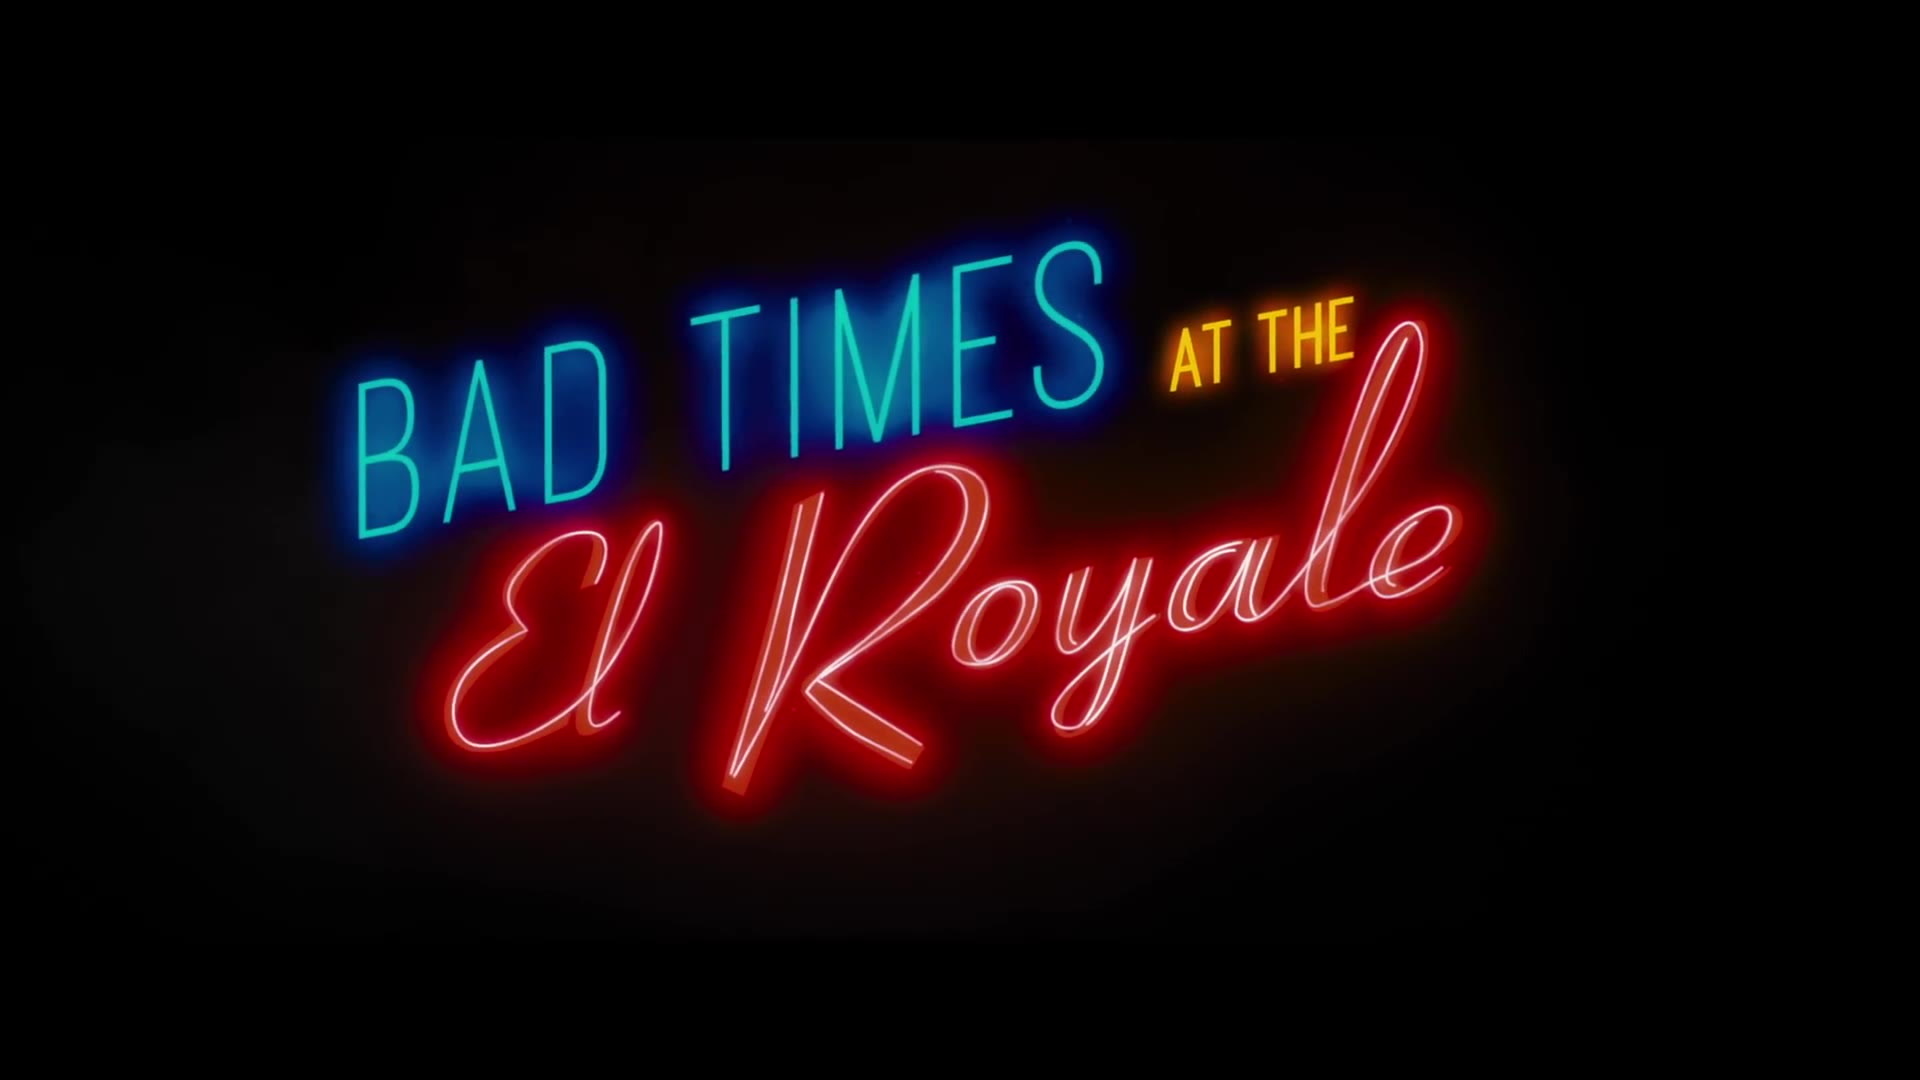 Bad Times at the El Royale, Stellar cast, Critically acclaimed, Highly rated, 1920x1080 Full HD Desktop